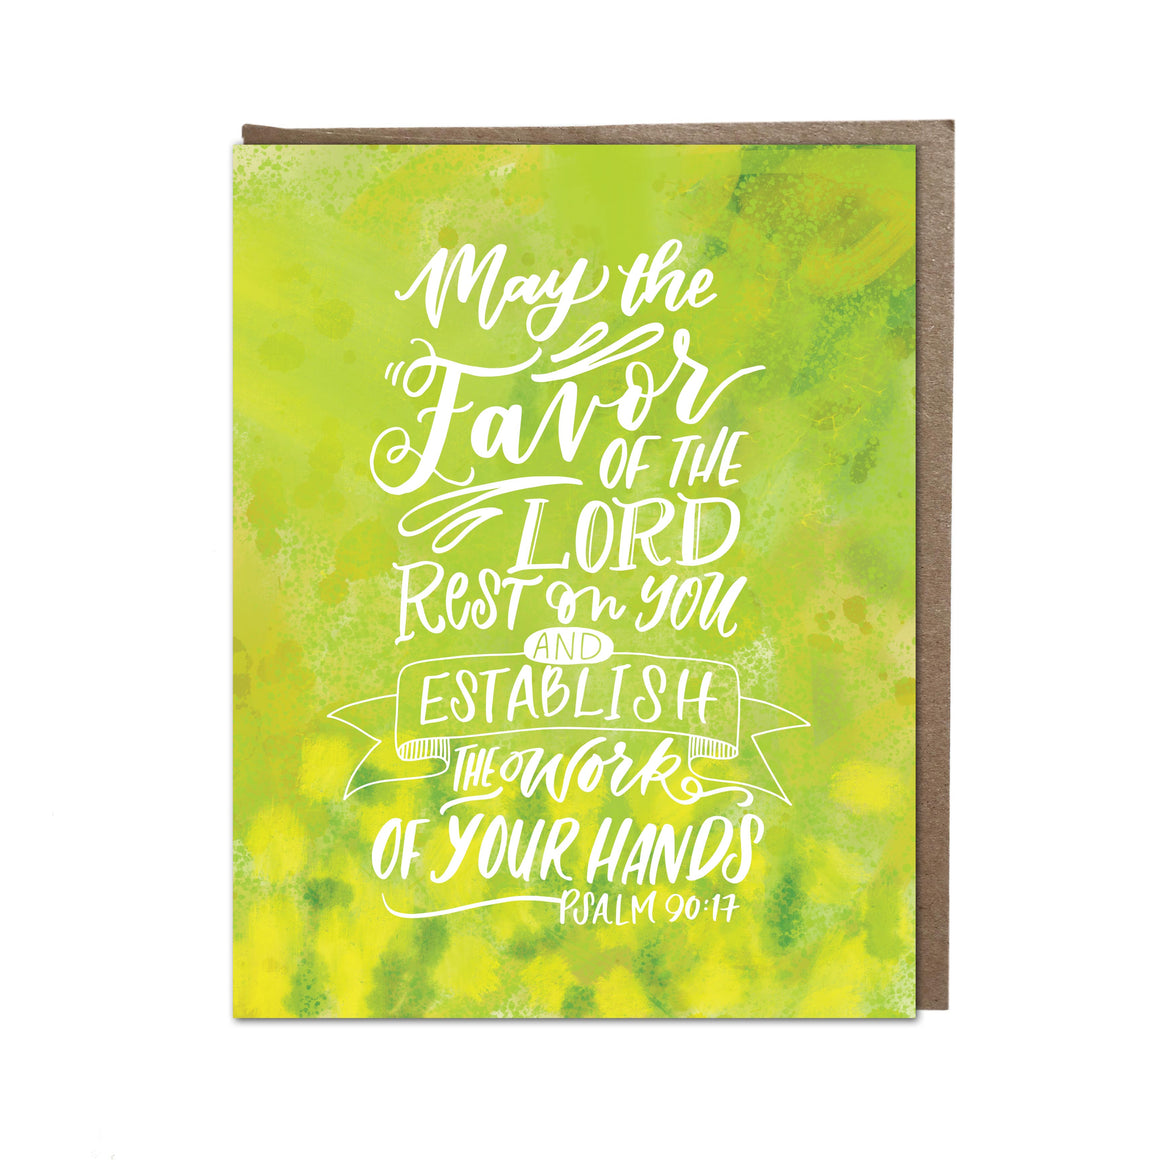 "Favor of the Lord" card